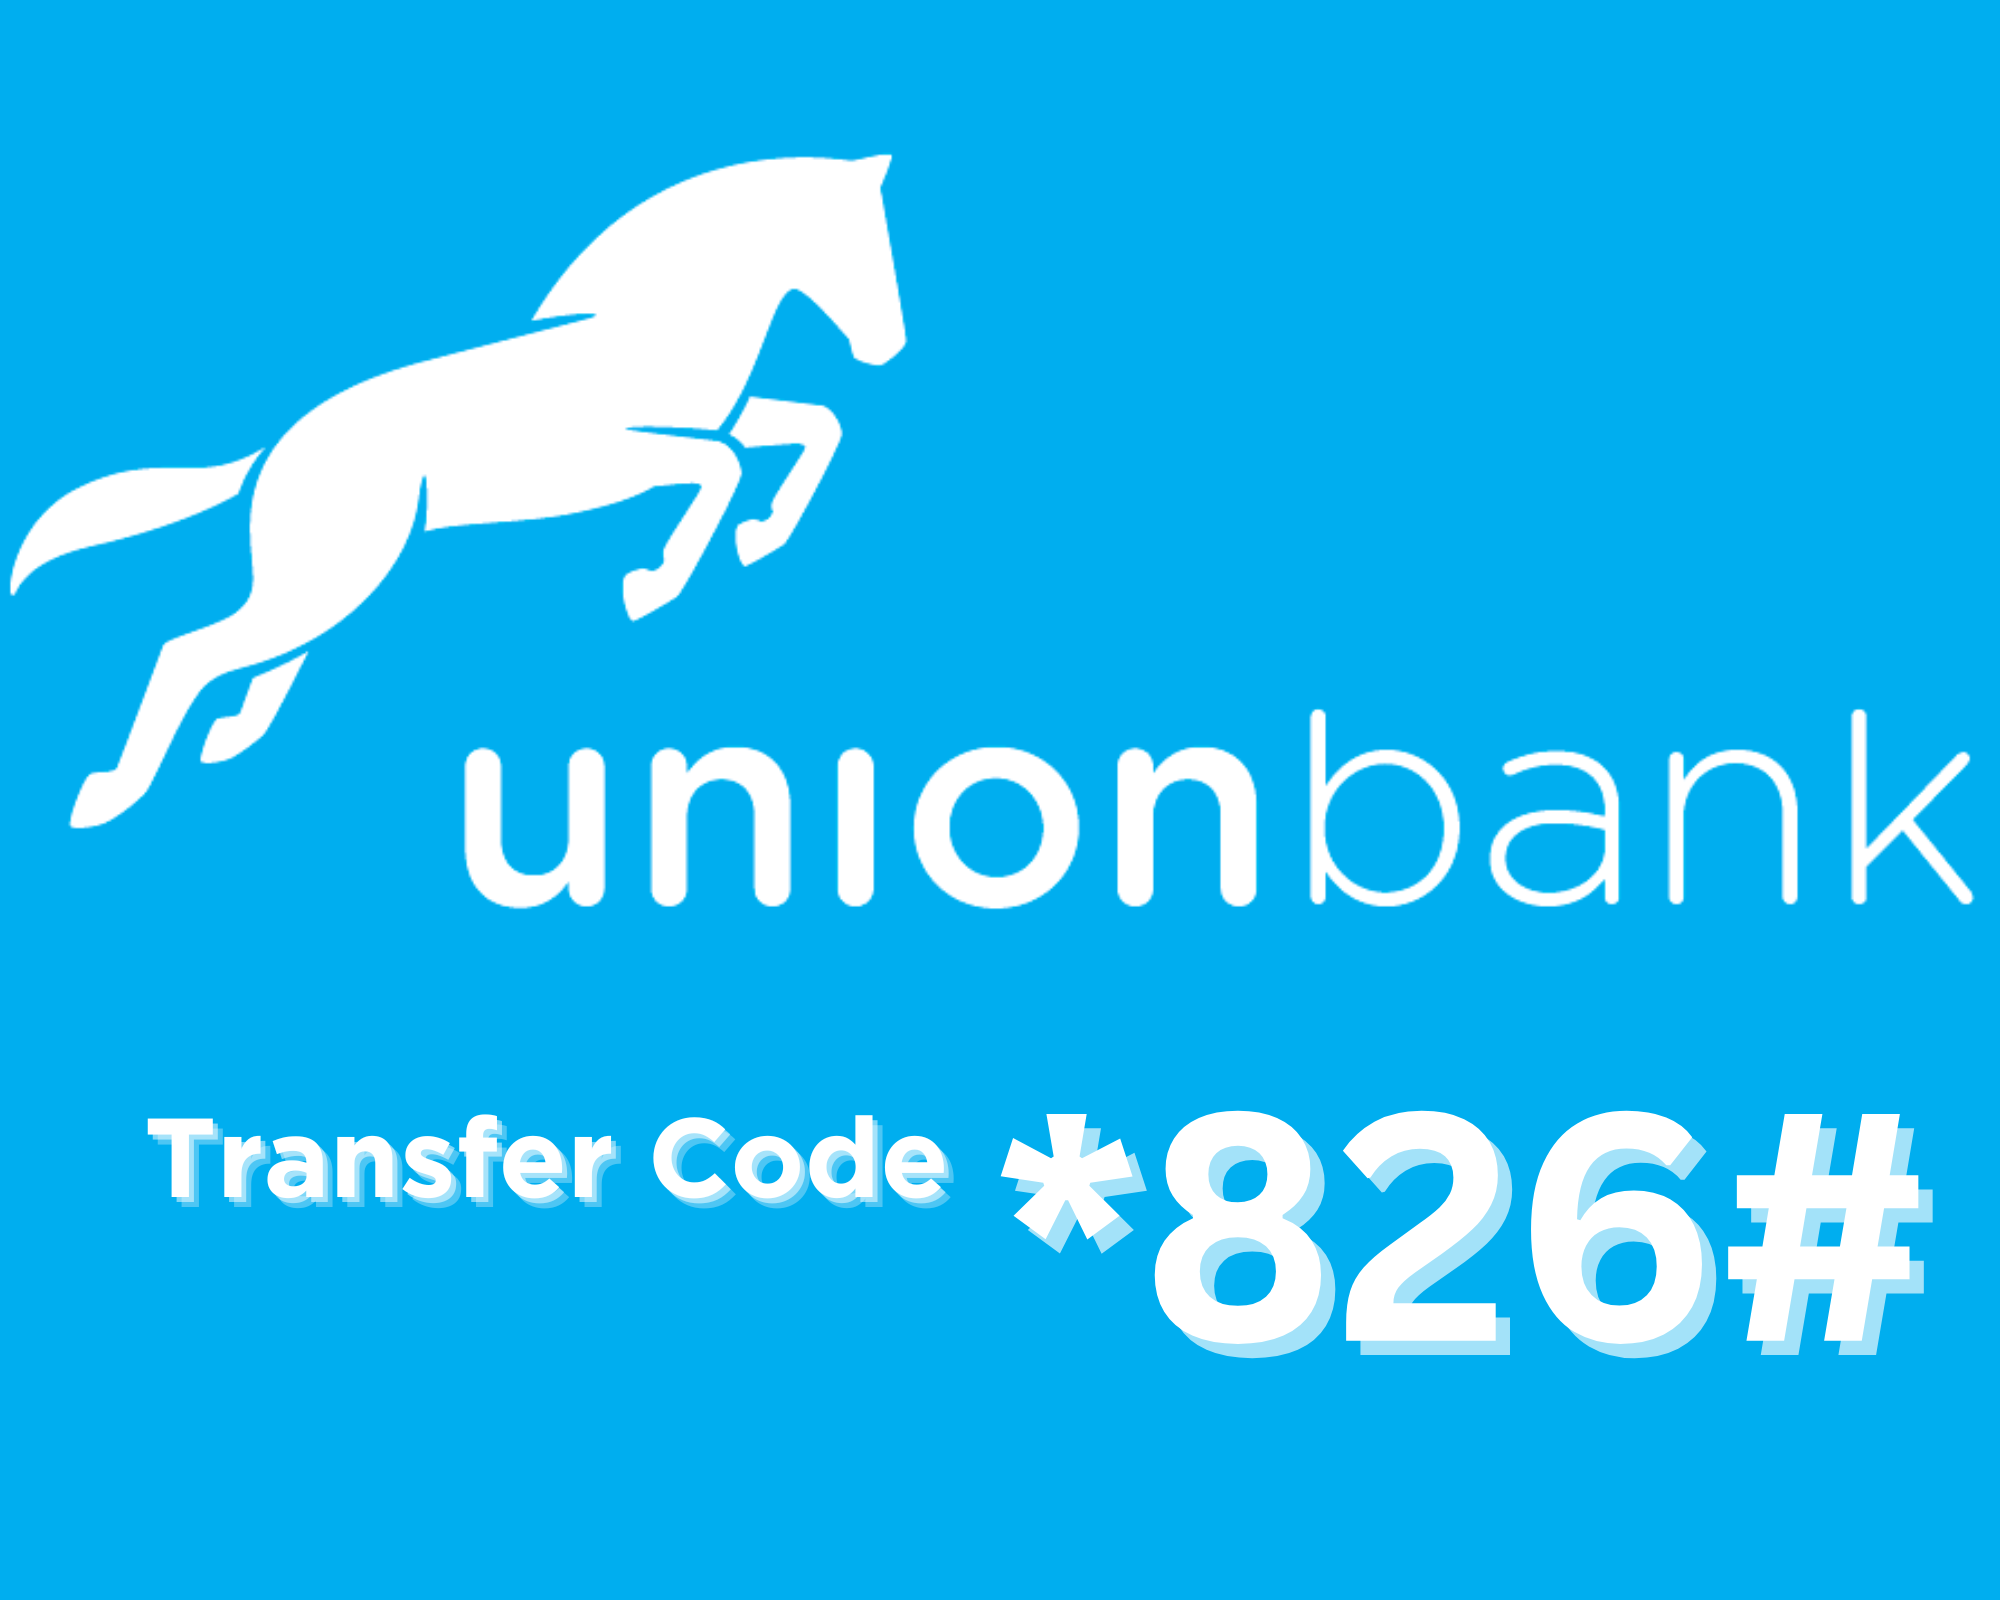 How to Activate the USSD Mobile Banking Code